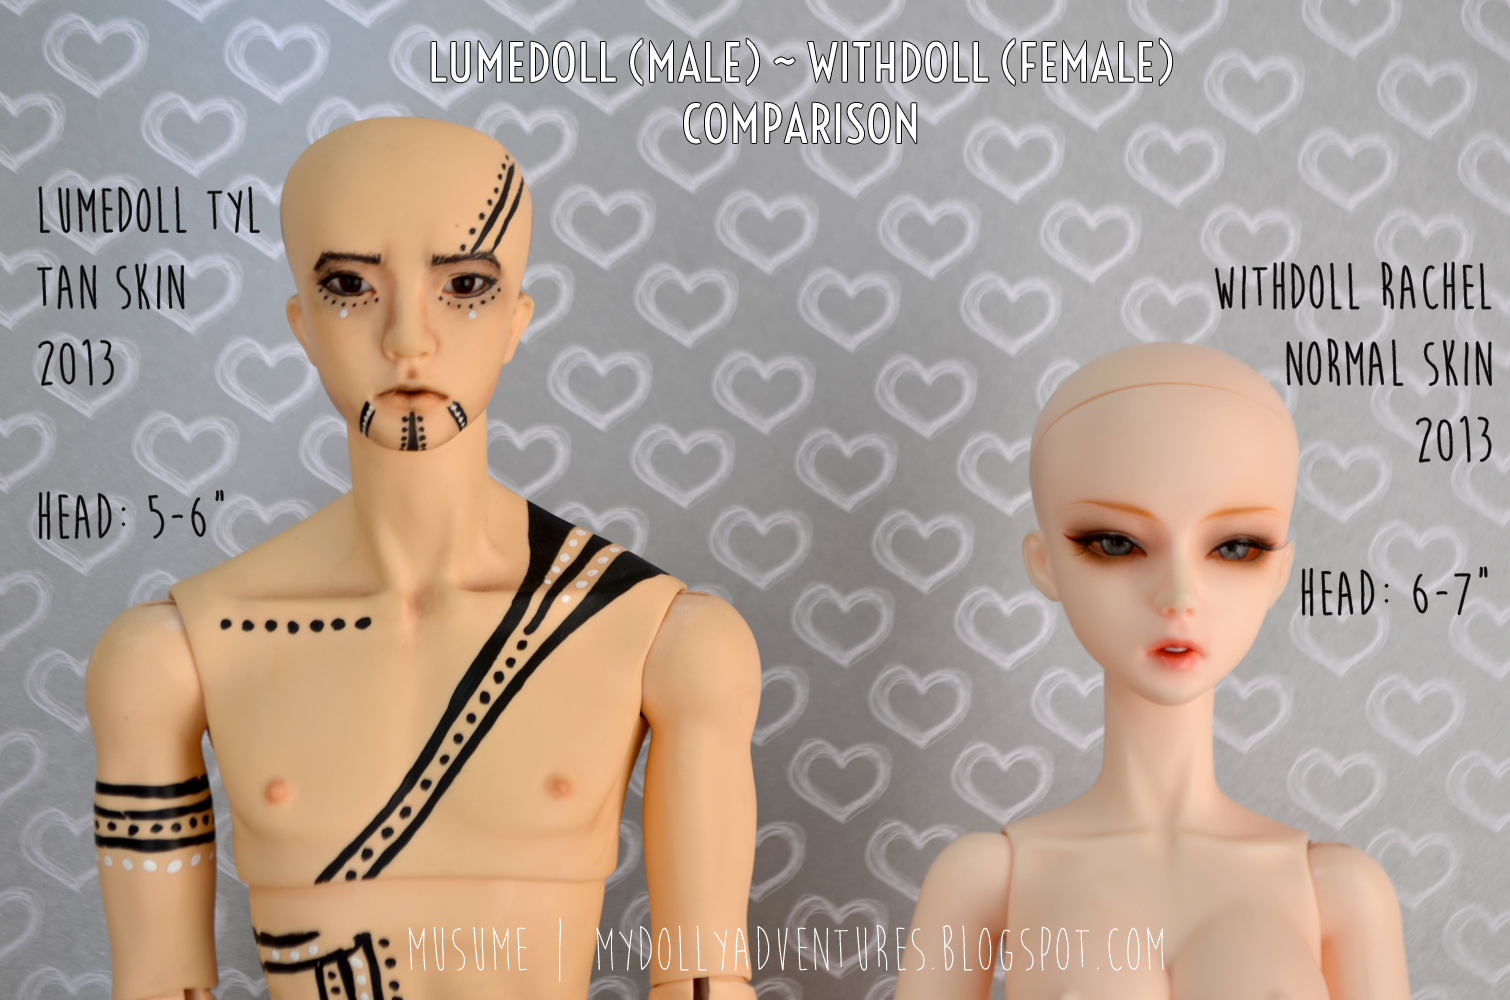 Comparison: Lumedoll and Withdoll 